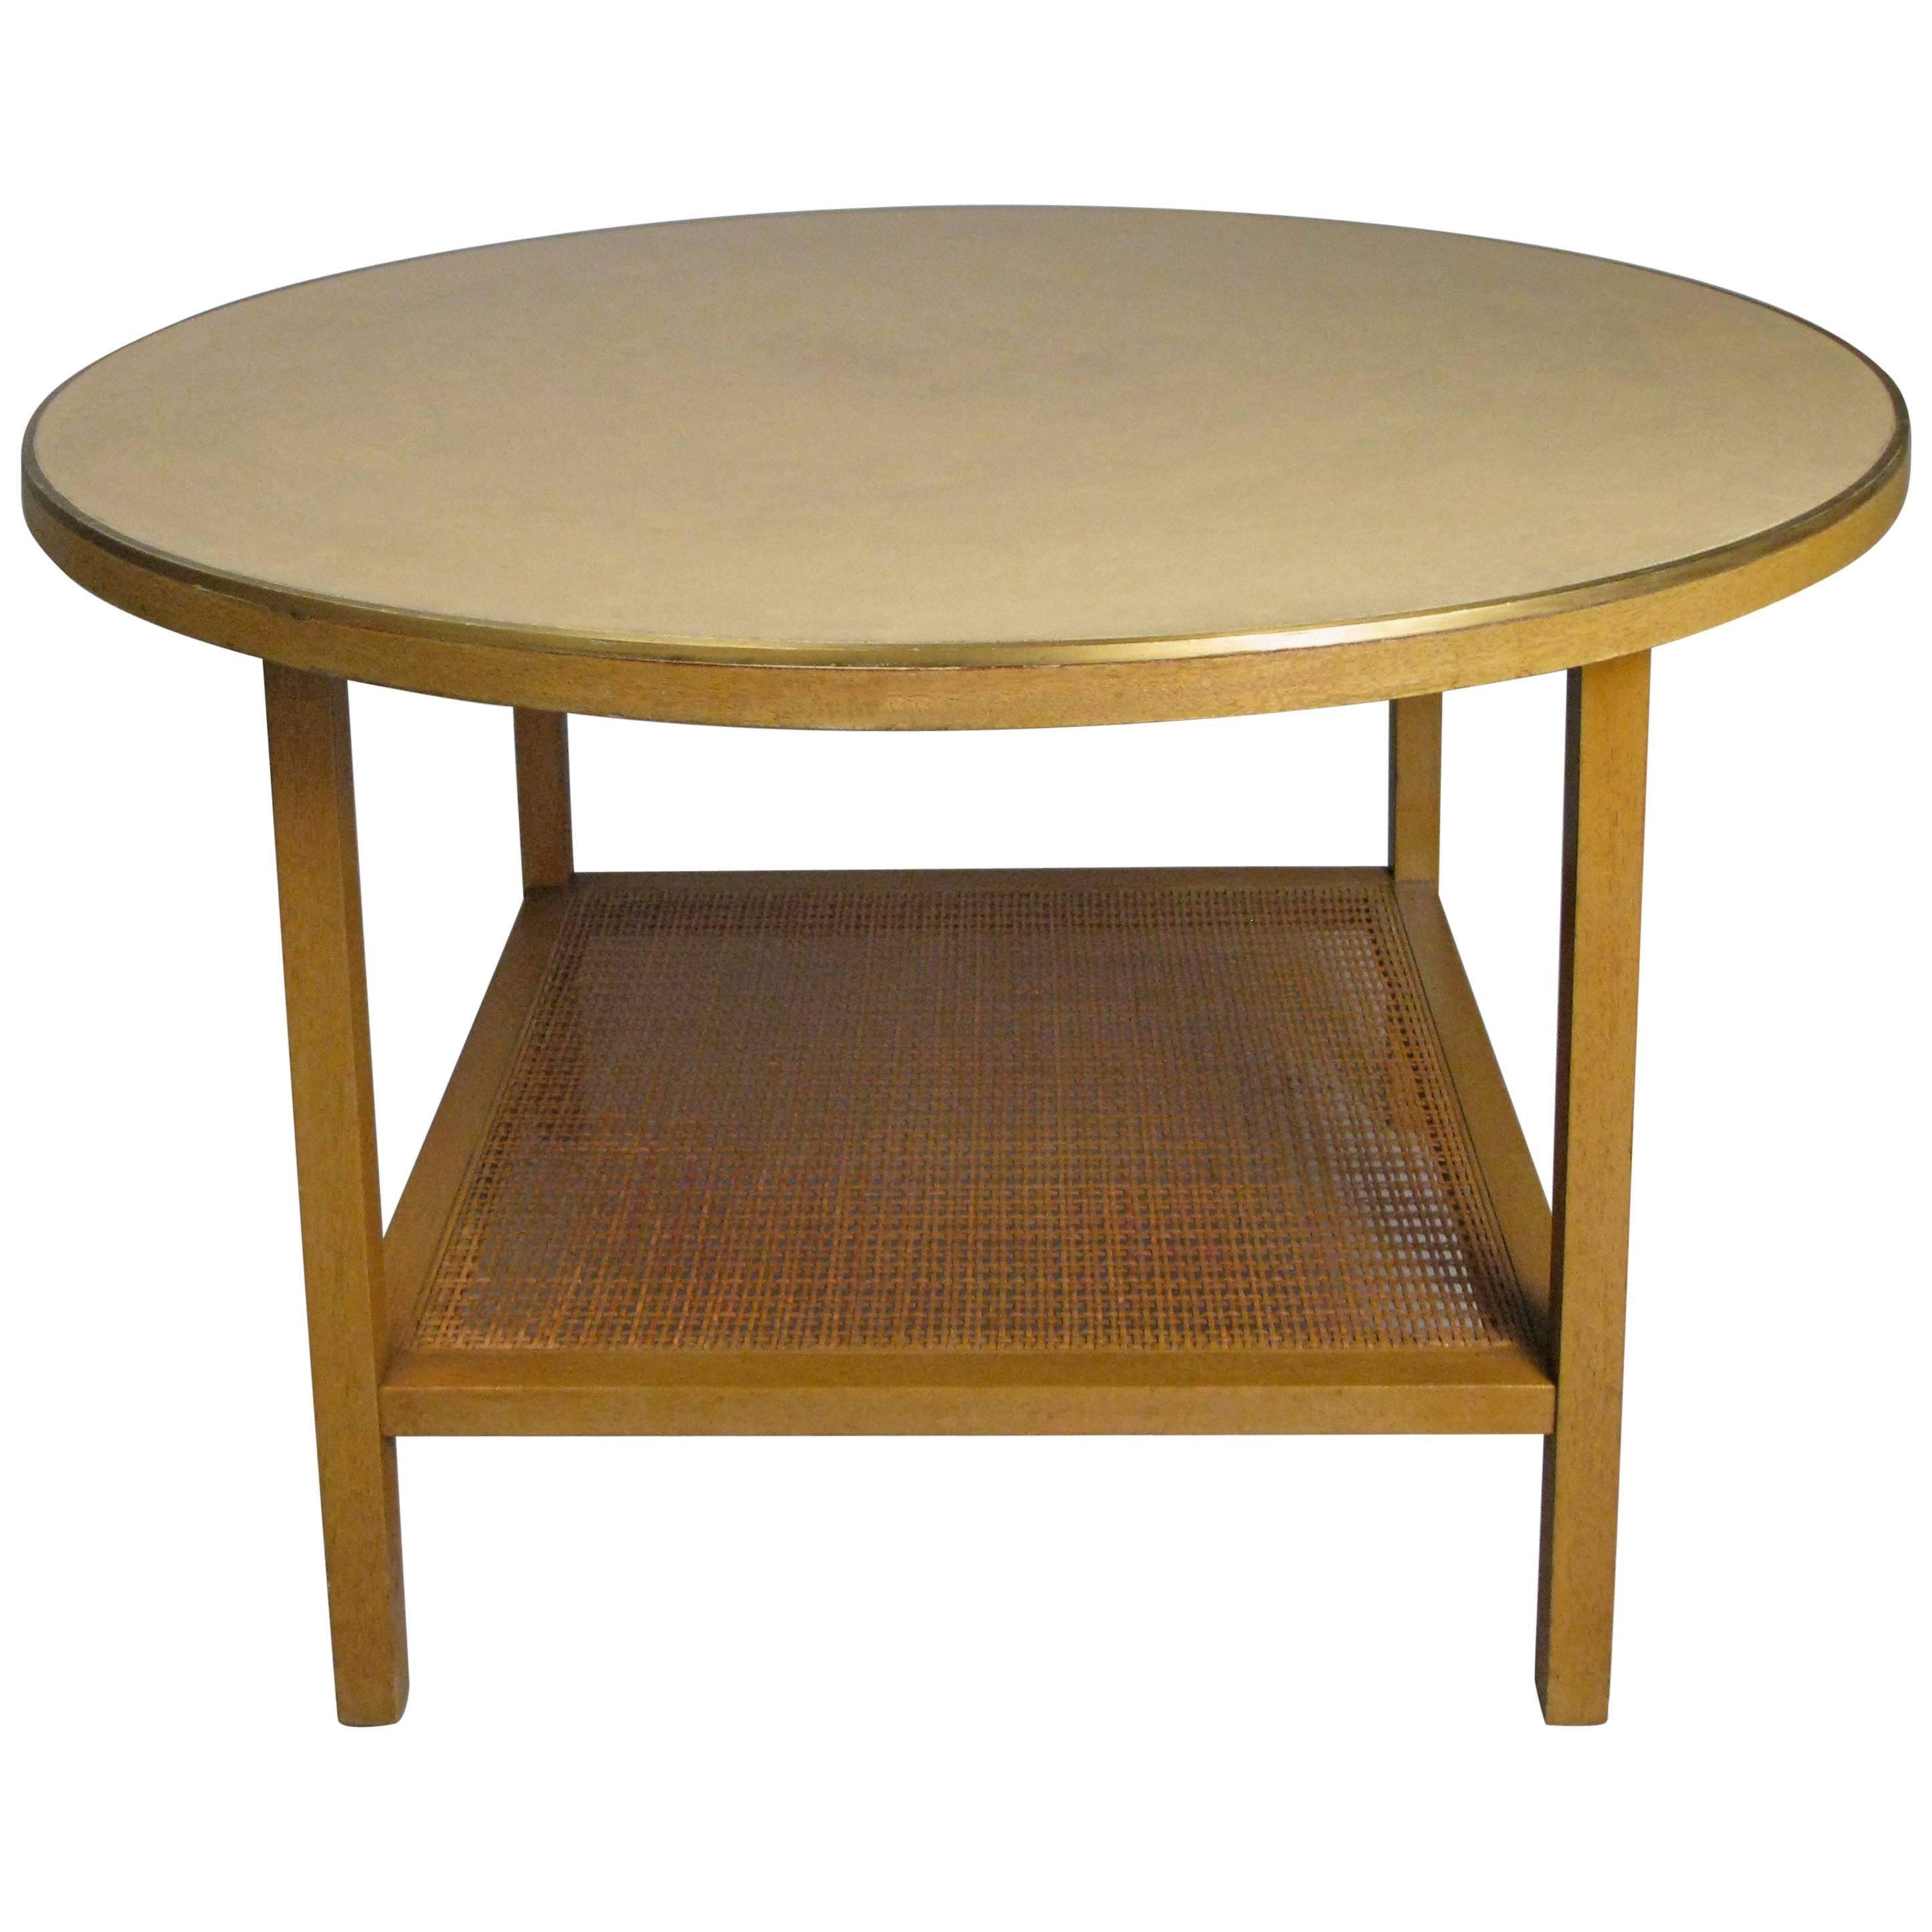 Paul McCobb Round Leather Top and Brass Trim Table